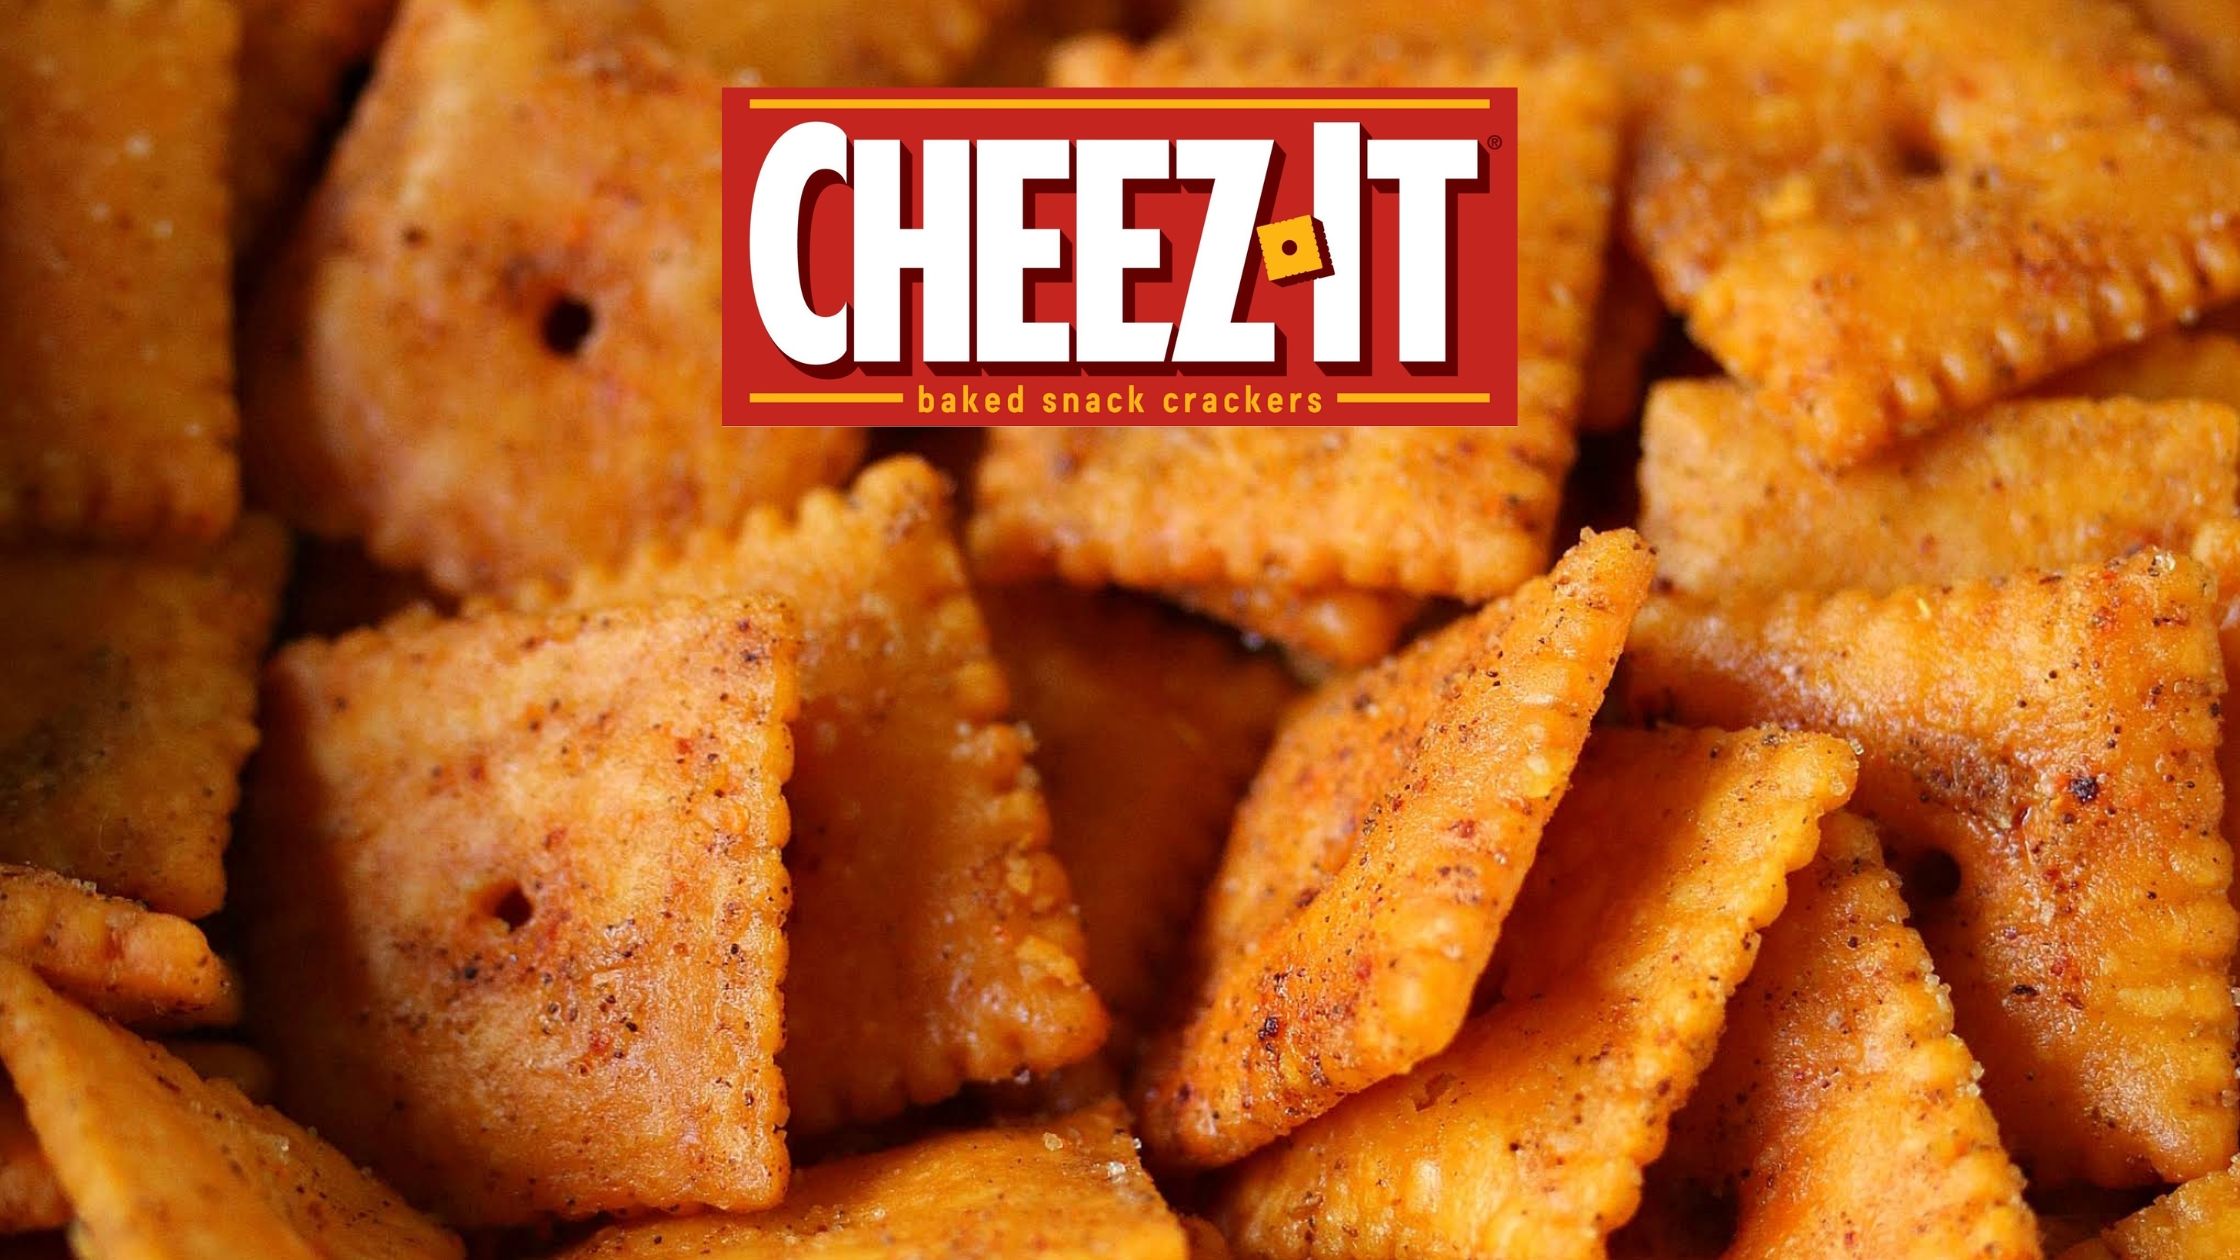 Discover Awesome New Cheez It Flavors And Much More